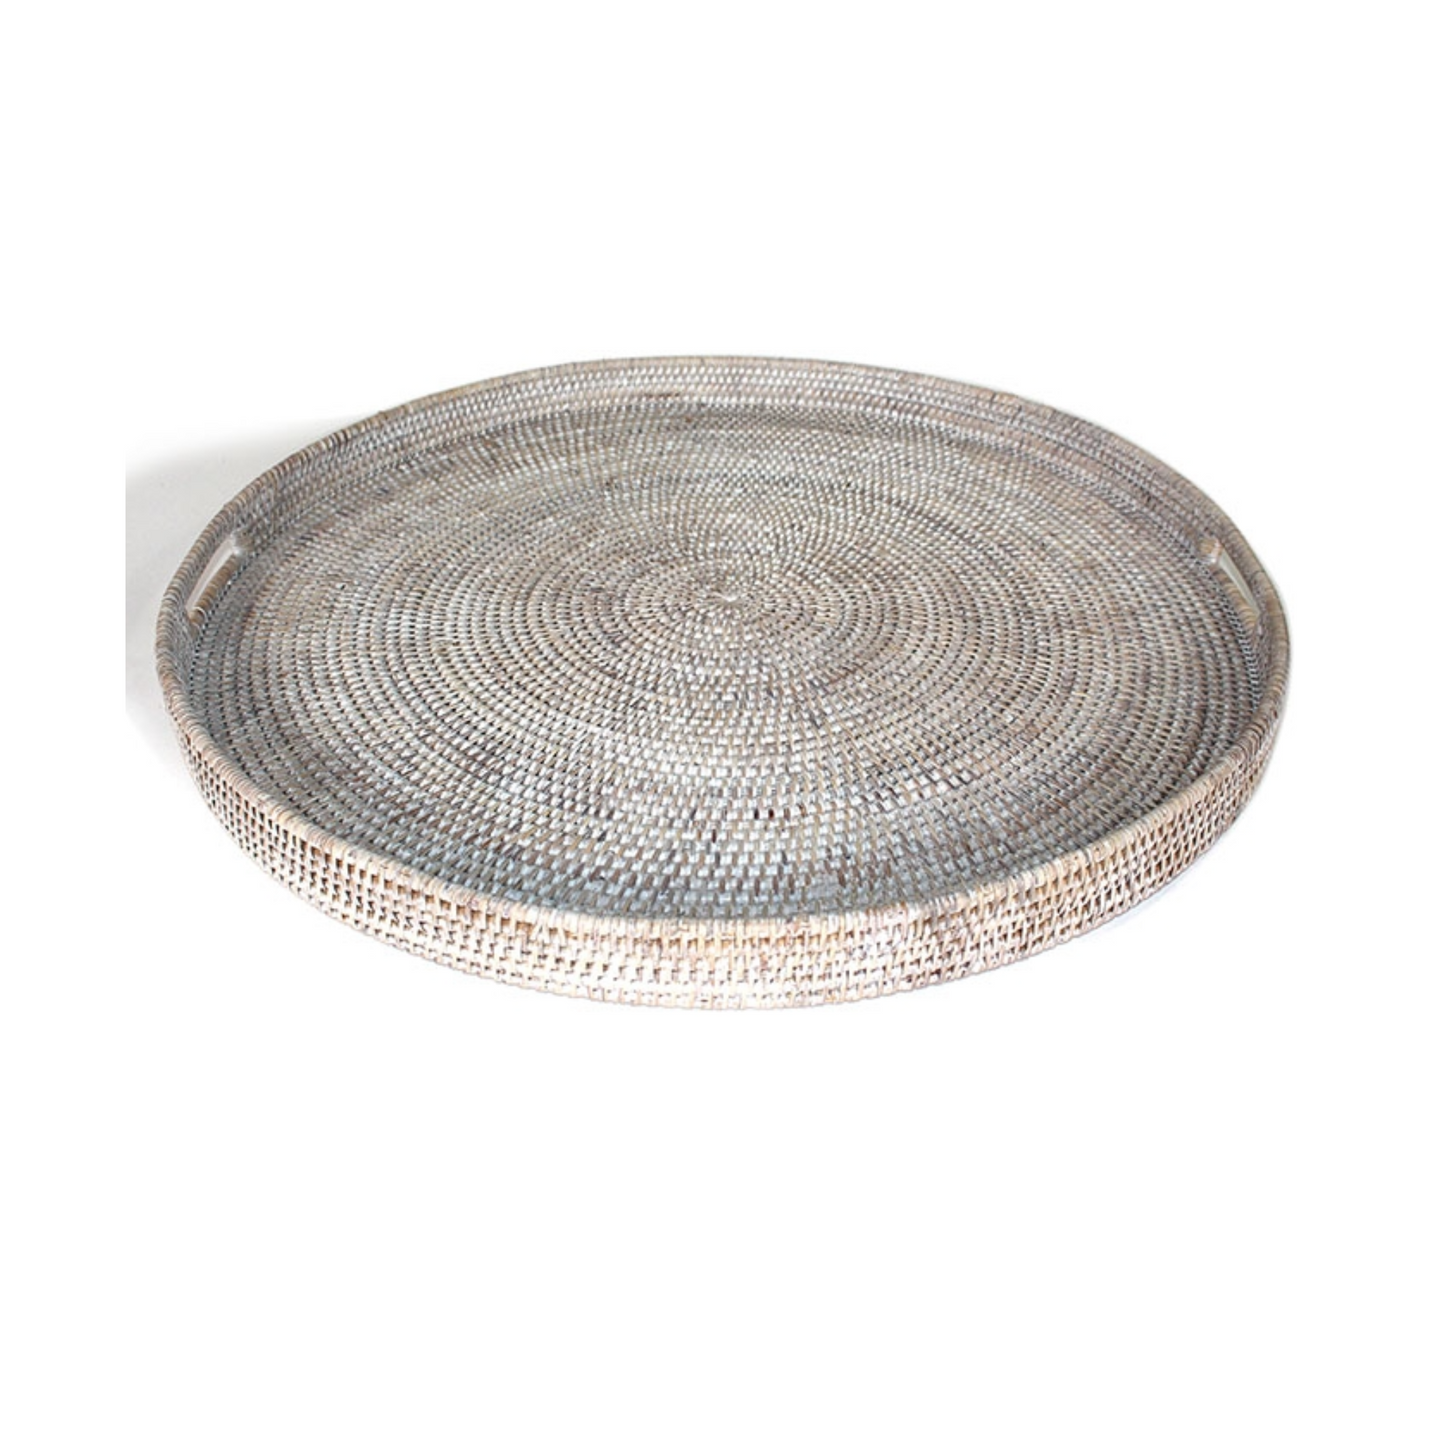 26" Round Tray with Handle